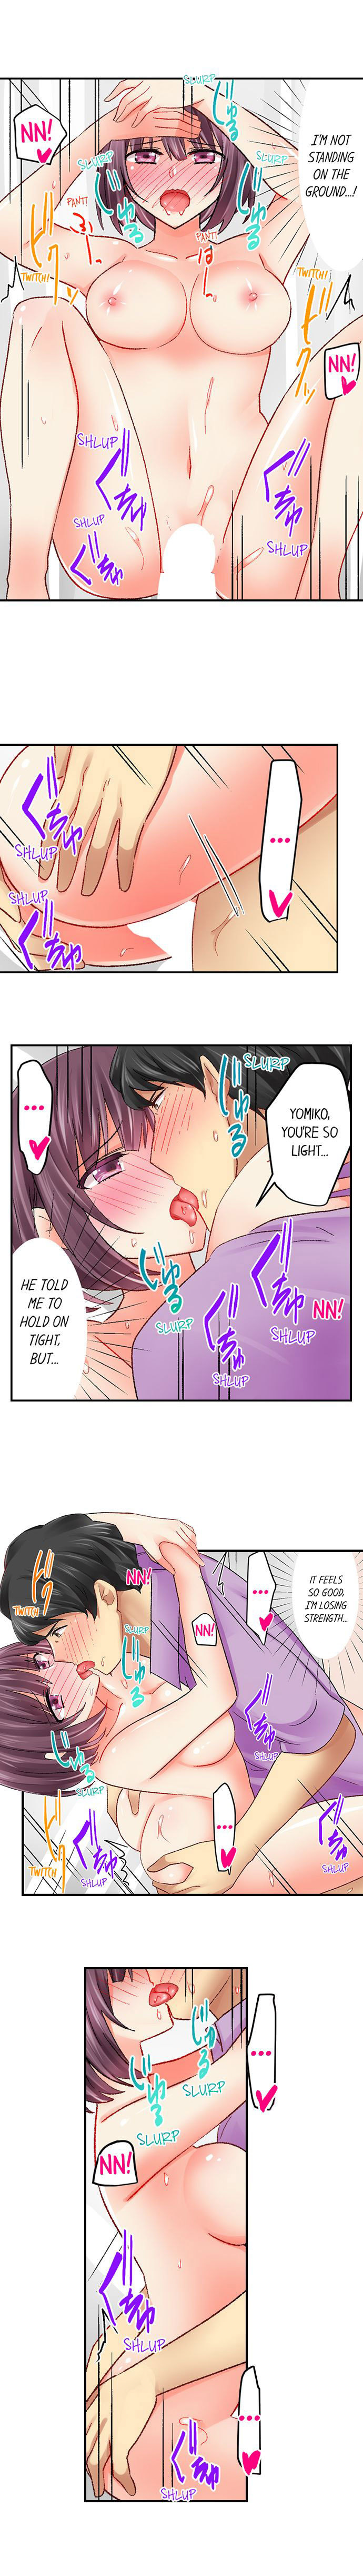 Our Kinky Newlywed Life Chapter 51 - Page 6